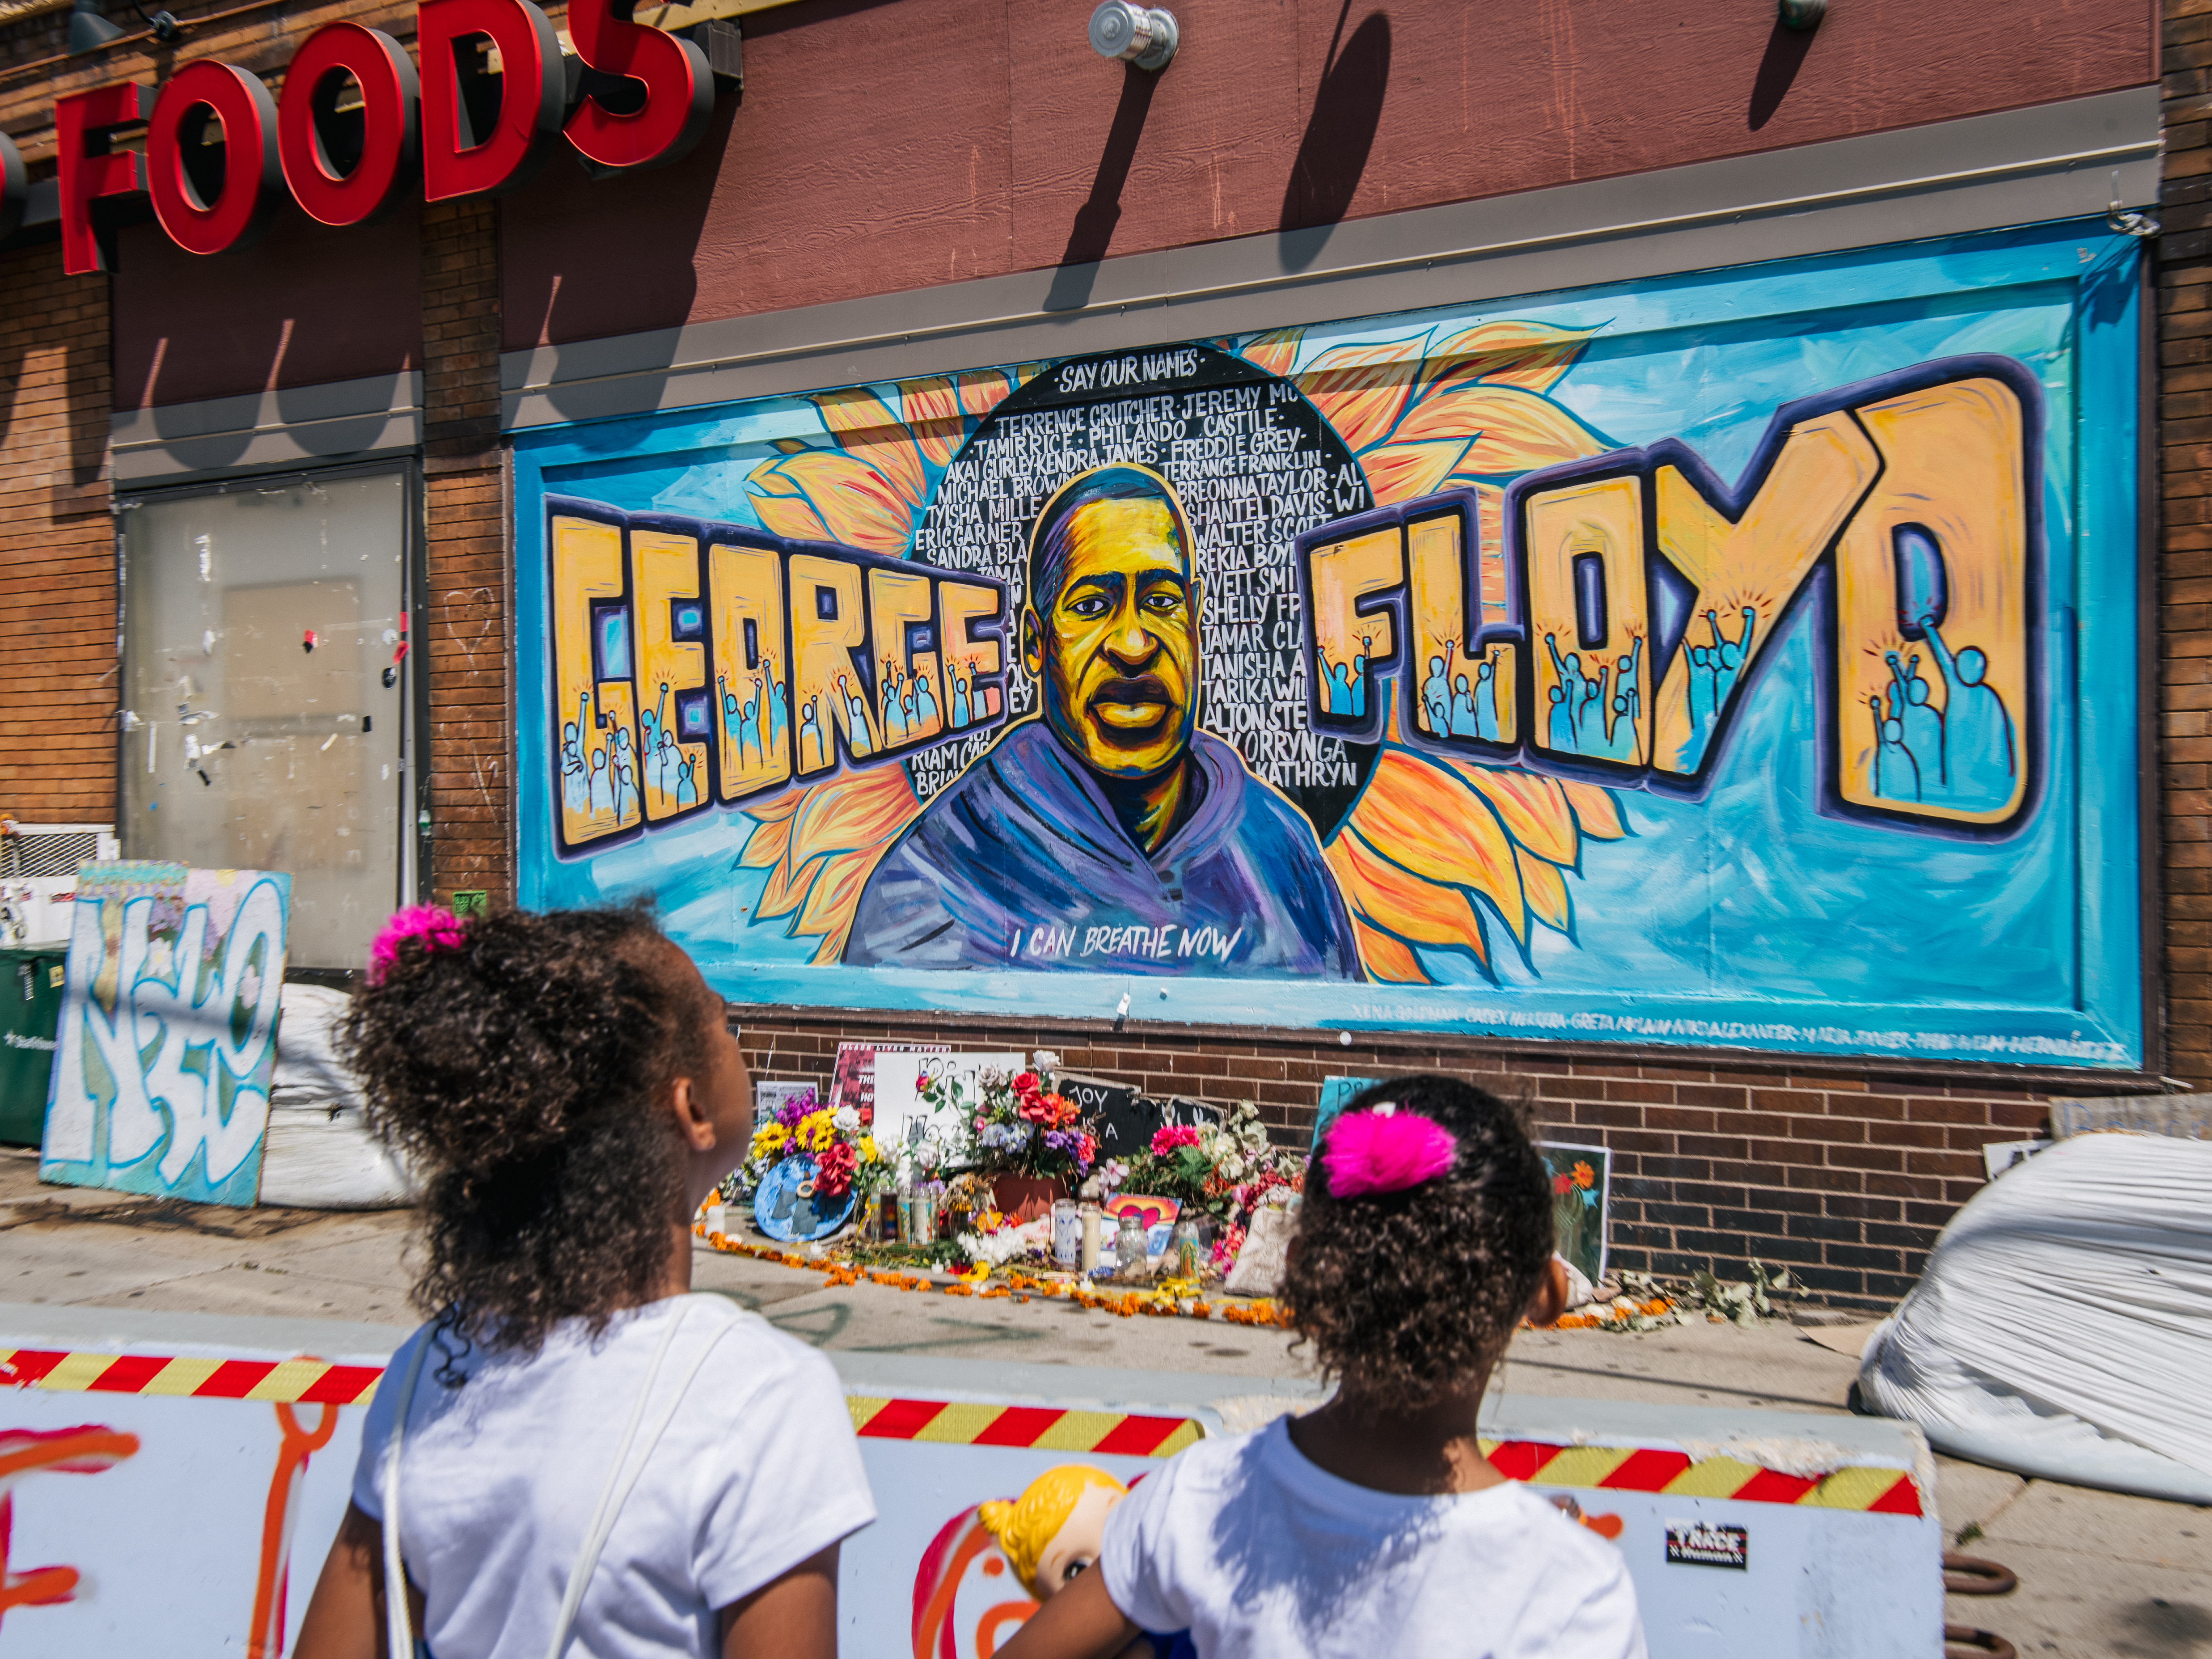 Jordan and Royal Pacheco view a mural of Floyd on Friday in Minneapolis ahead of Chauvin's sentencing. Brandon Bell/Getty Images